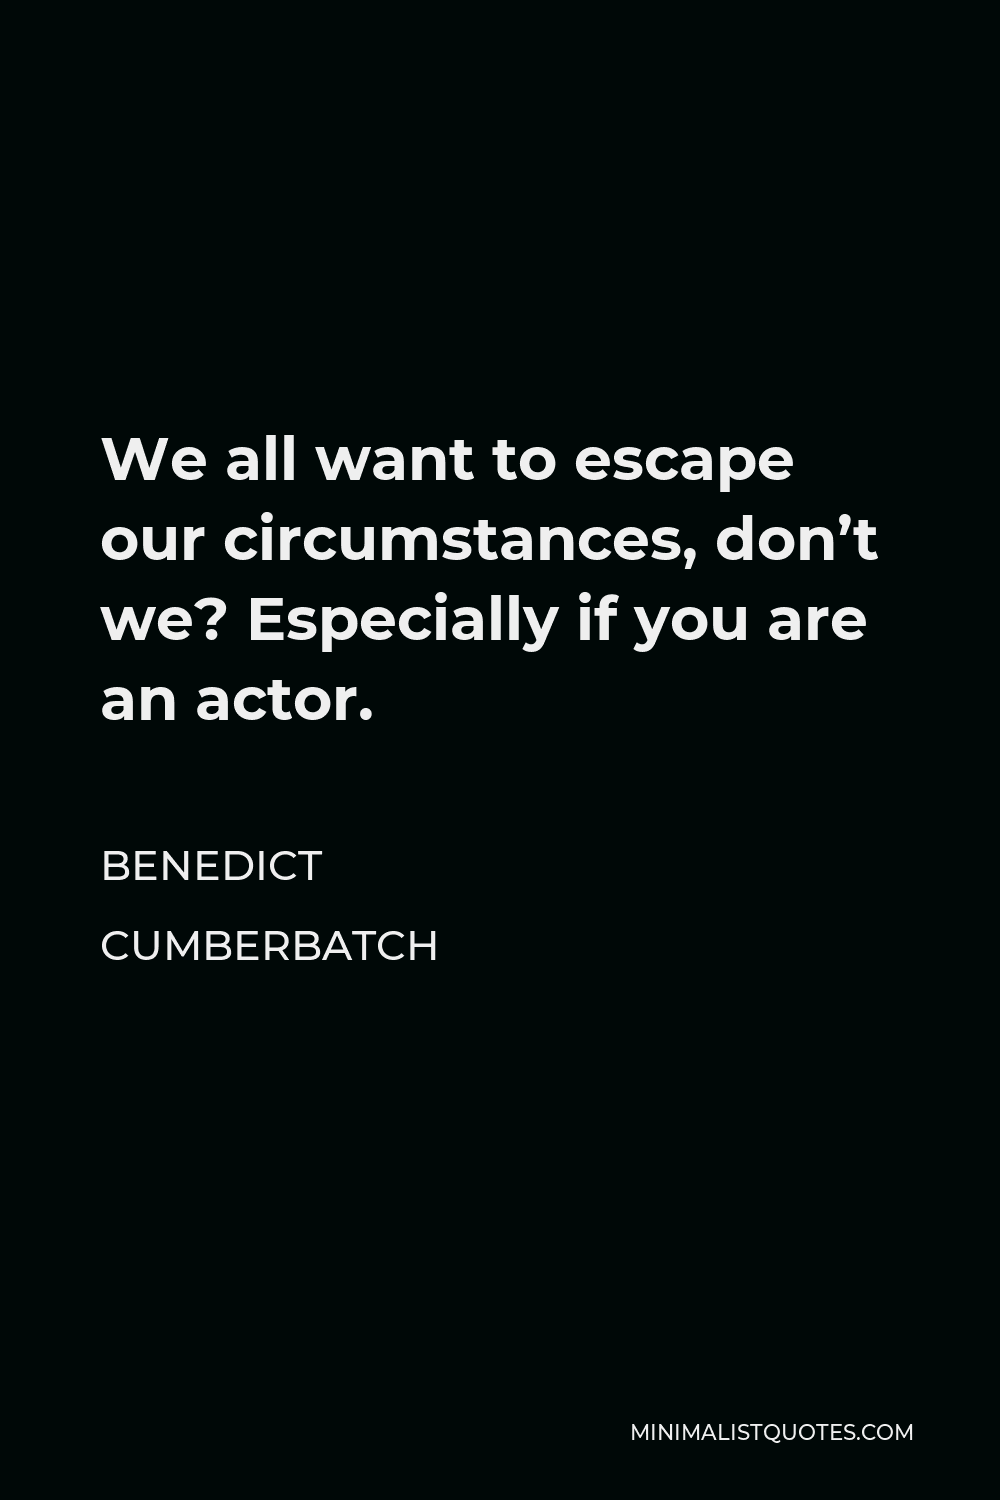 Benedict Cumberbatch Quote - We all want to escape our circumstances, don’t we? Especially if you are an actor.